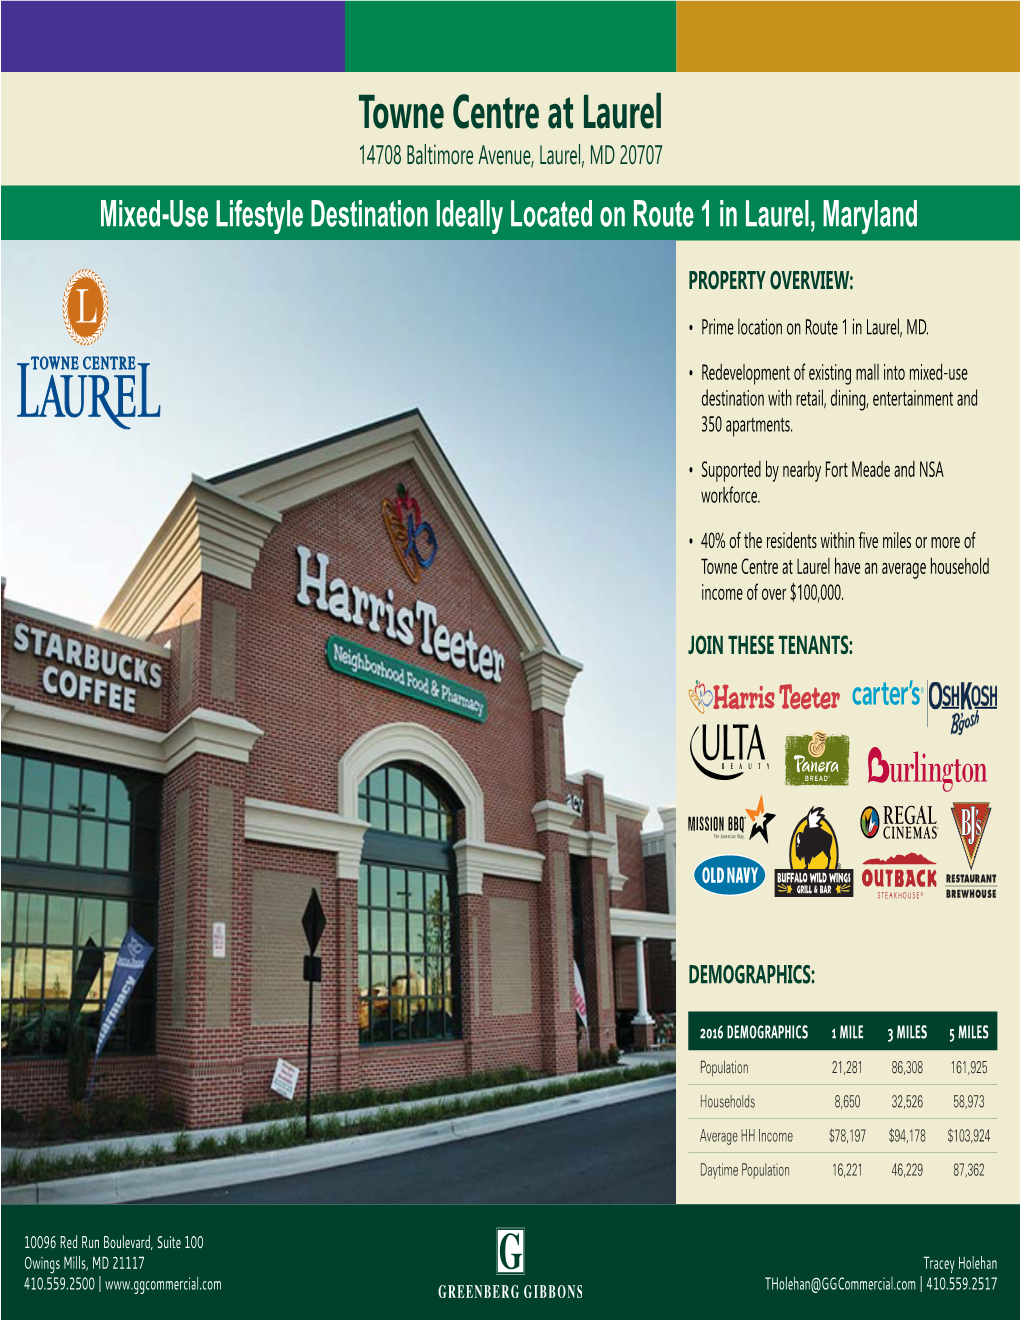 Towne Centre at Laurel 14708 Baltimore Avenue, Laurel, MD 20707 Mixed-Use Lifestyle Destination Ideally Located on Route 1 in Laurel, Maryland